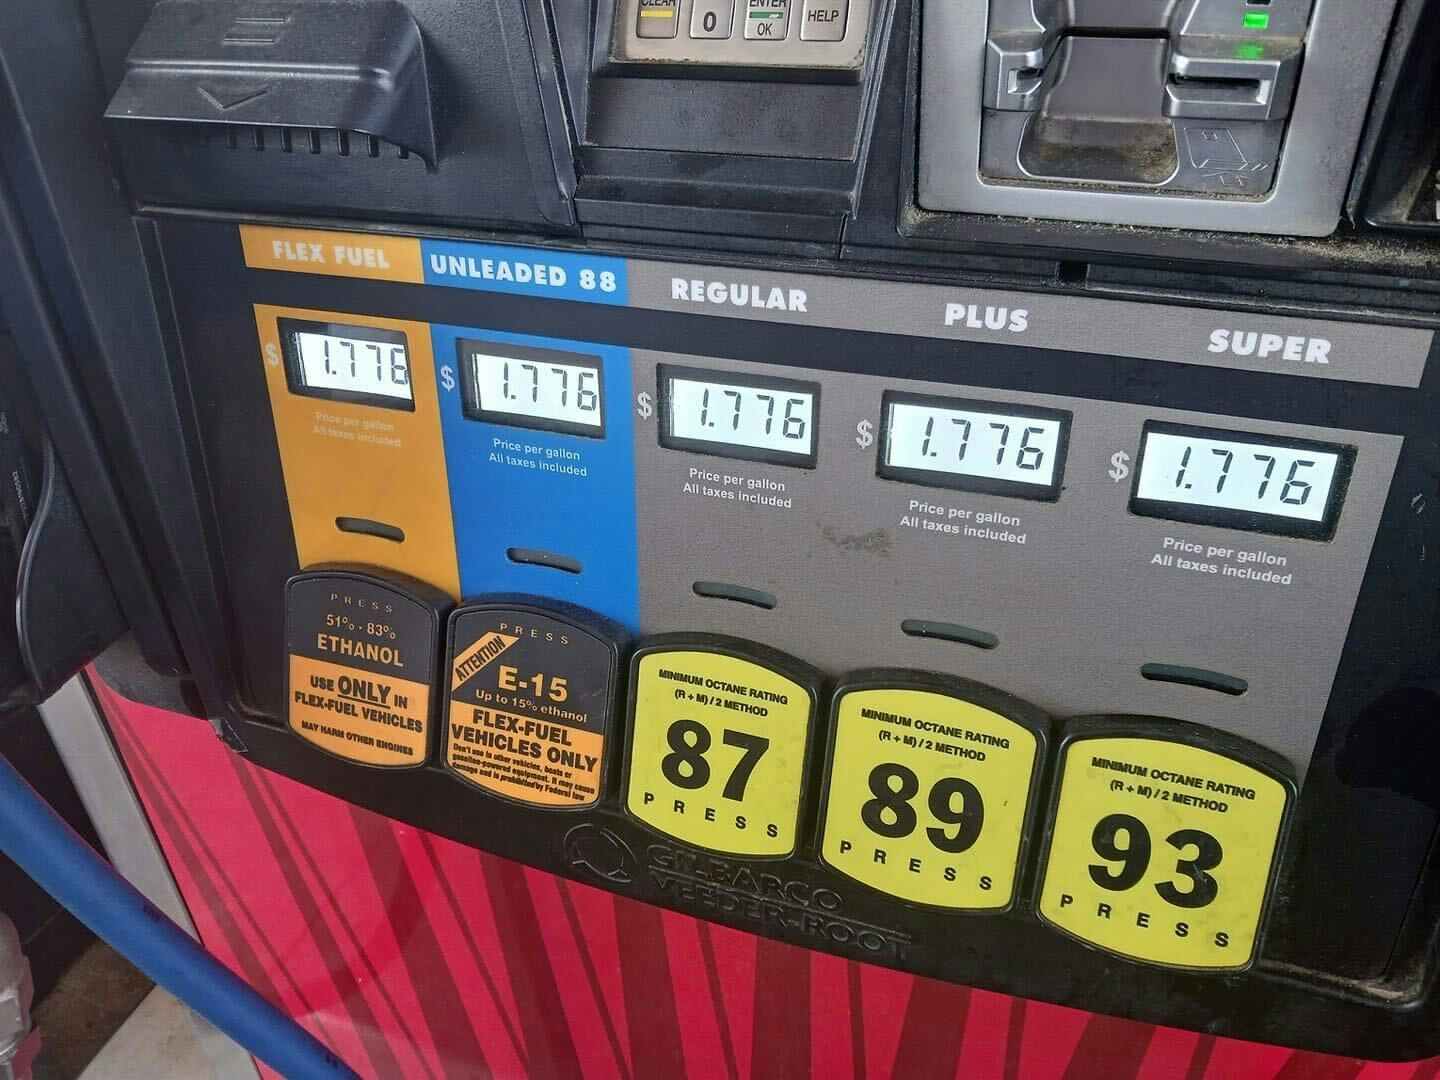 A Sheetz gas pump on July 4, with $1.776 per gallon prices on every fuel type.